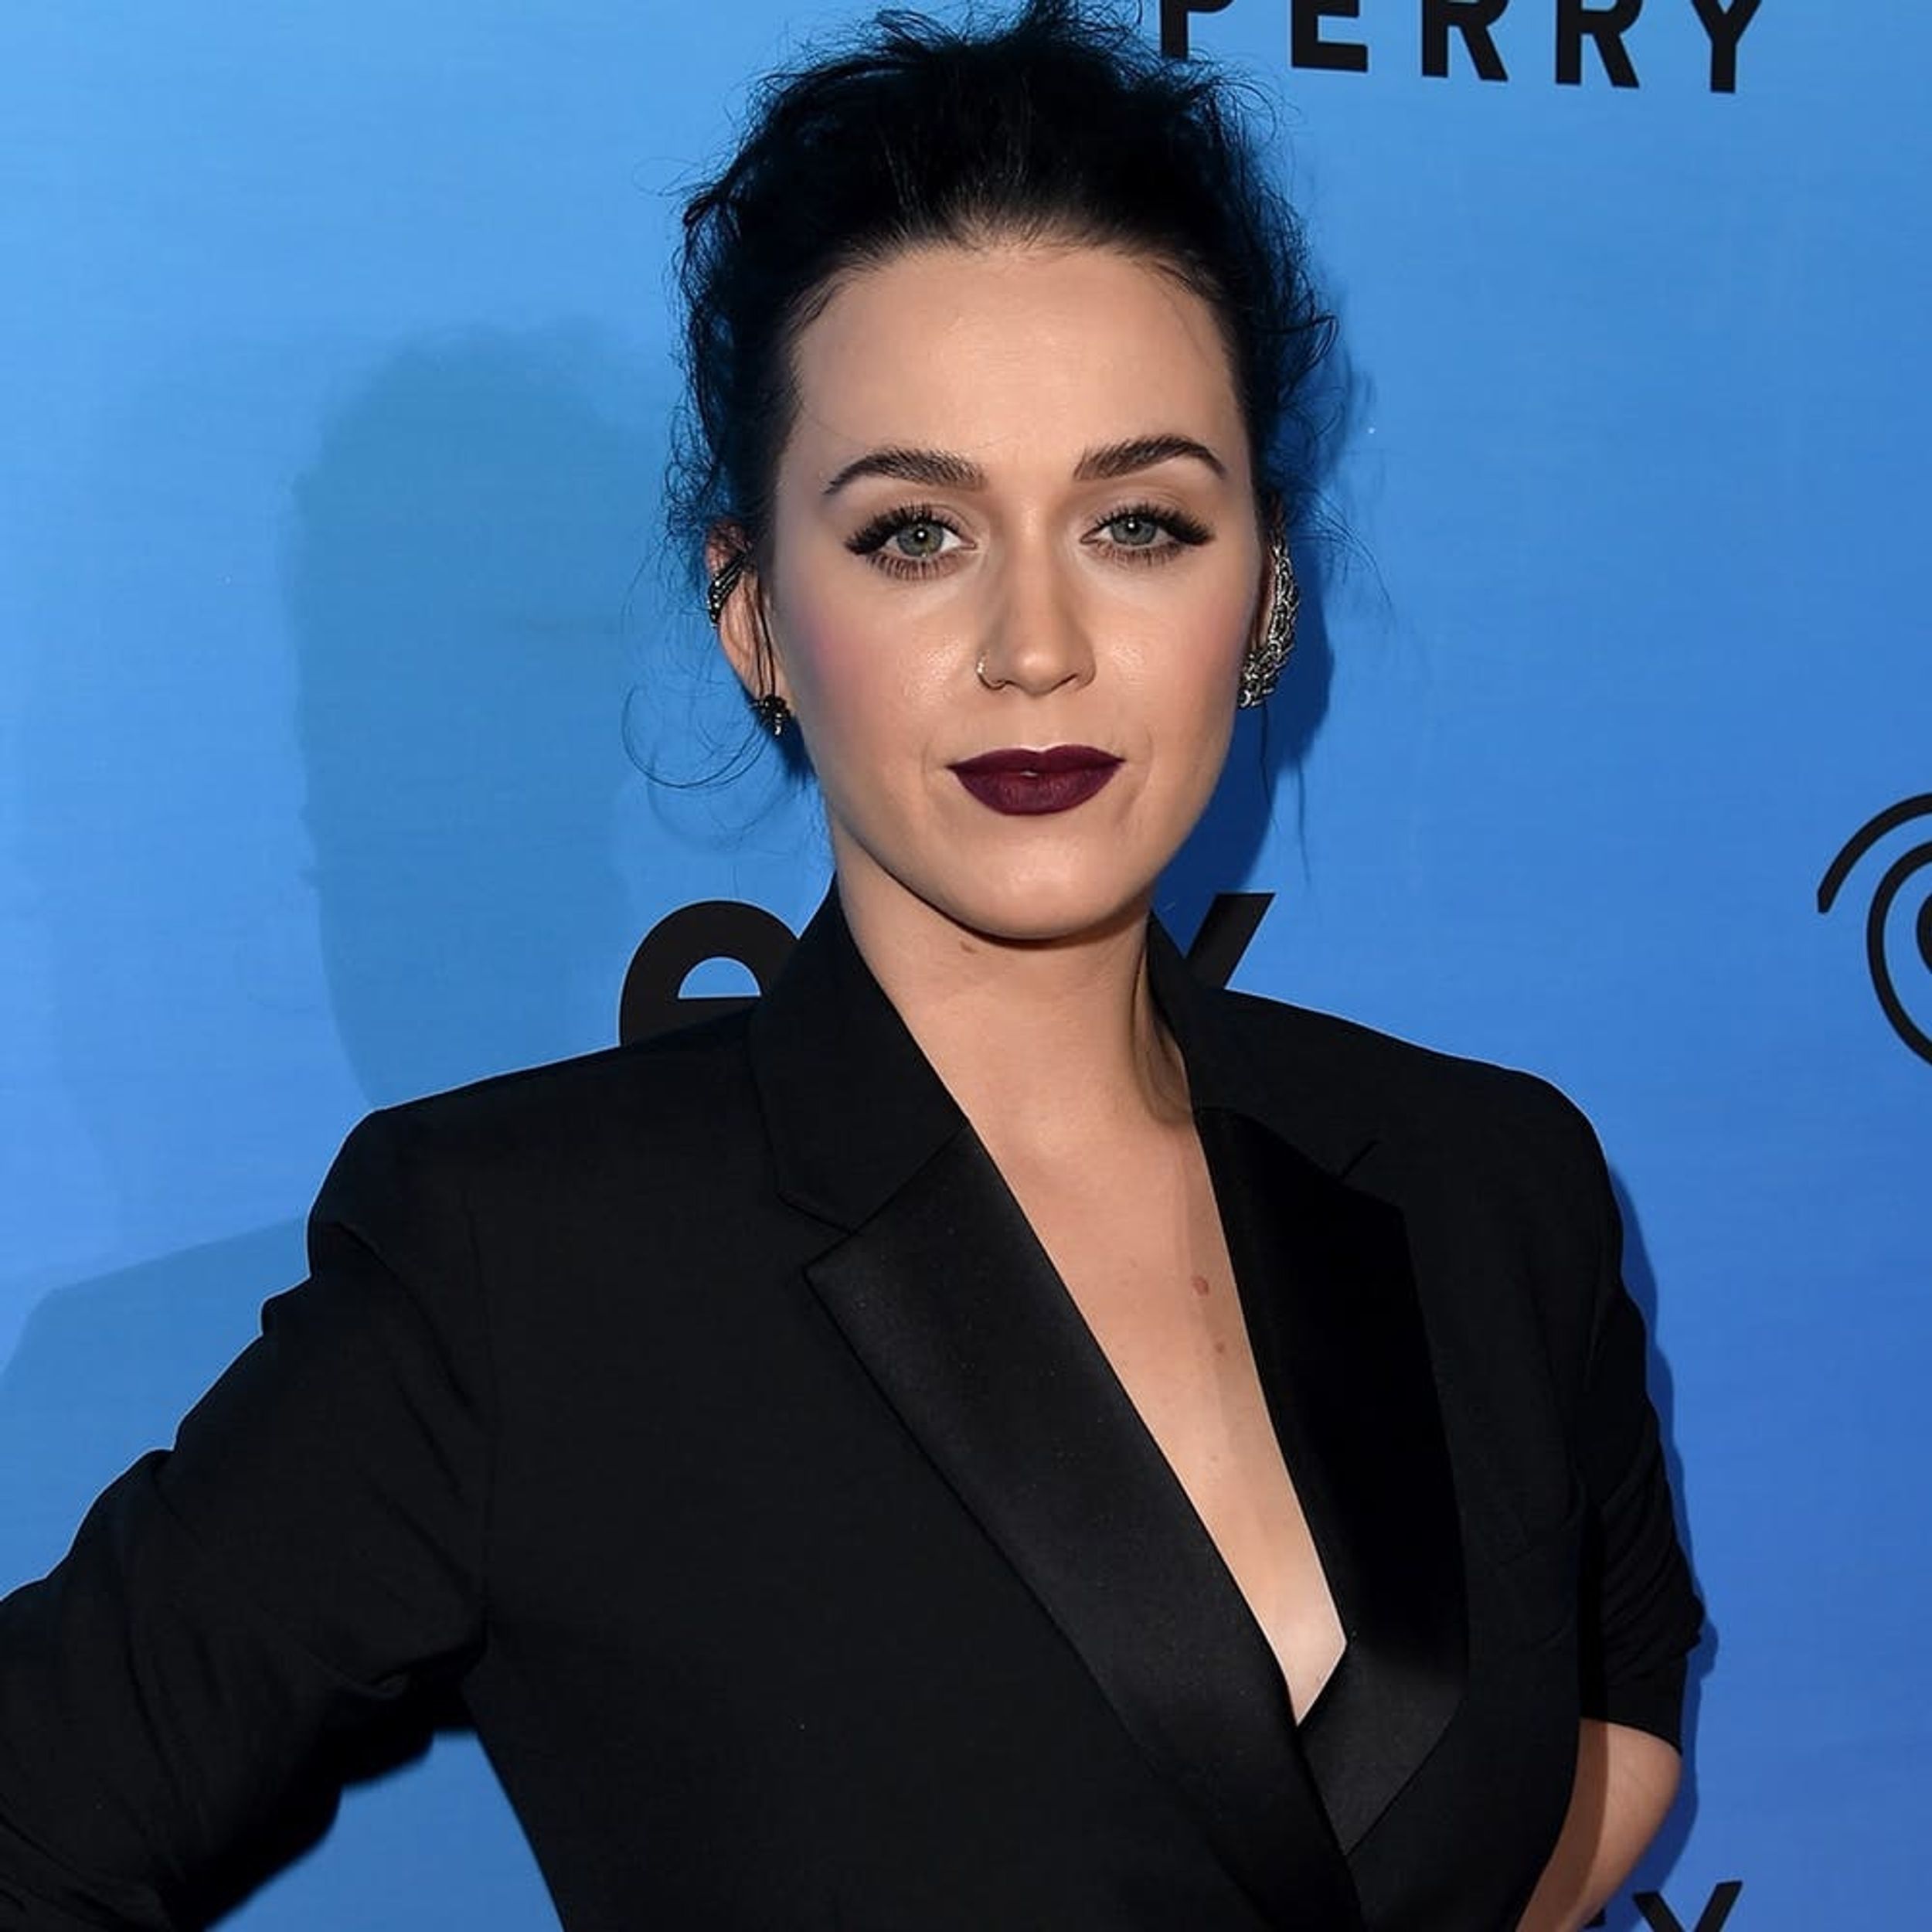 Katy Perry Just Dyed Her Hair the Perfect Fall Color